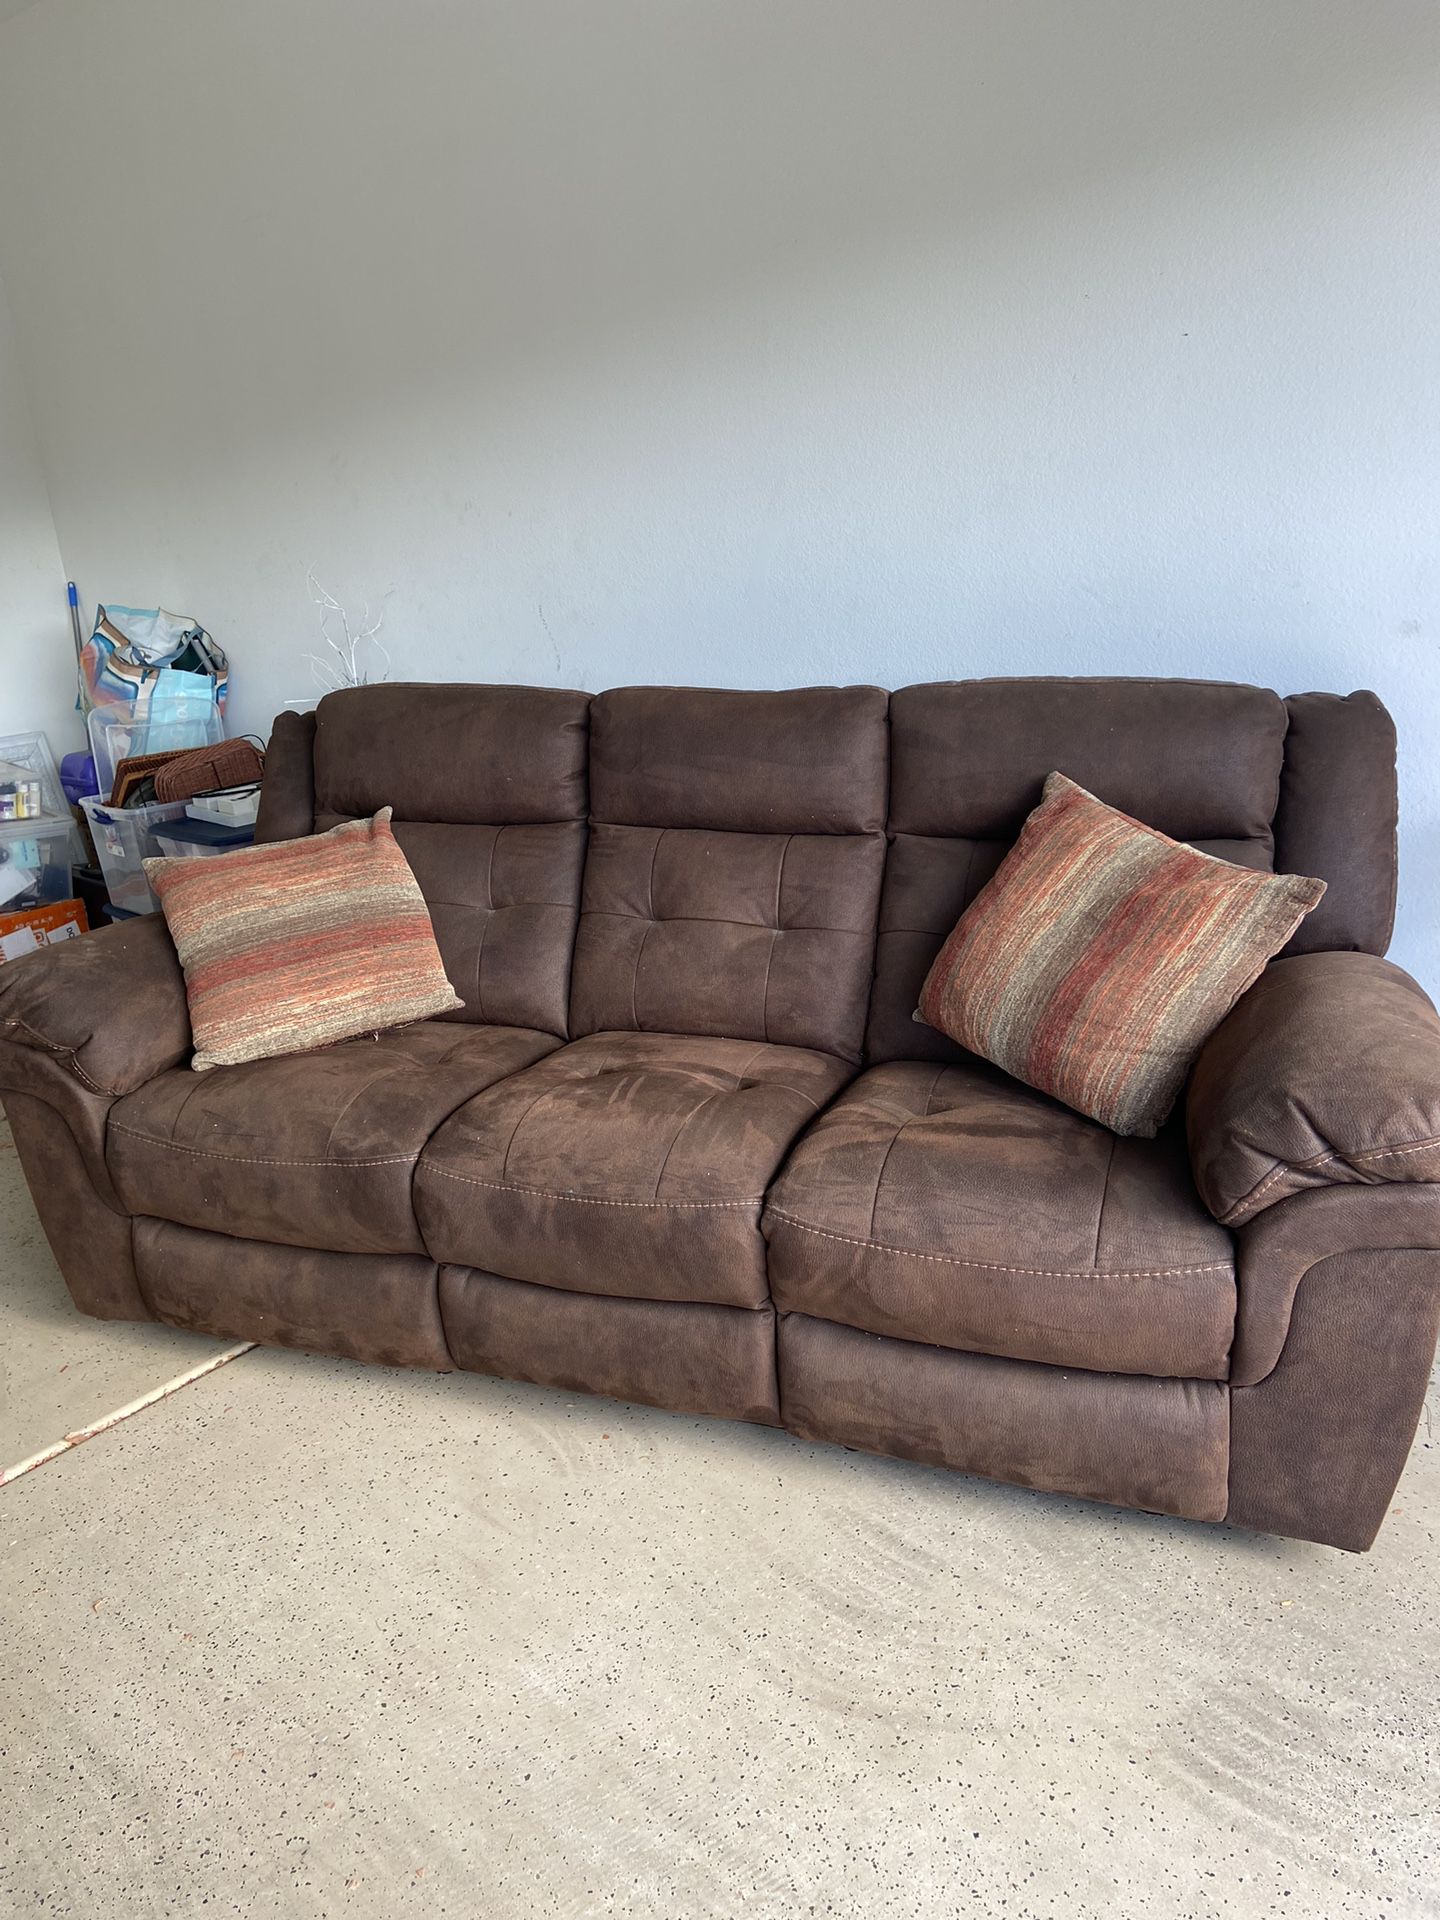  Reclining Couch  650.00 OBO